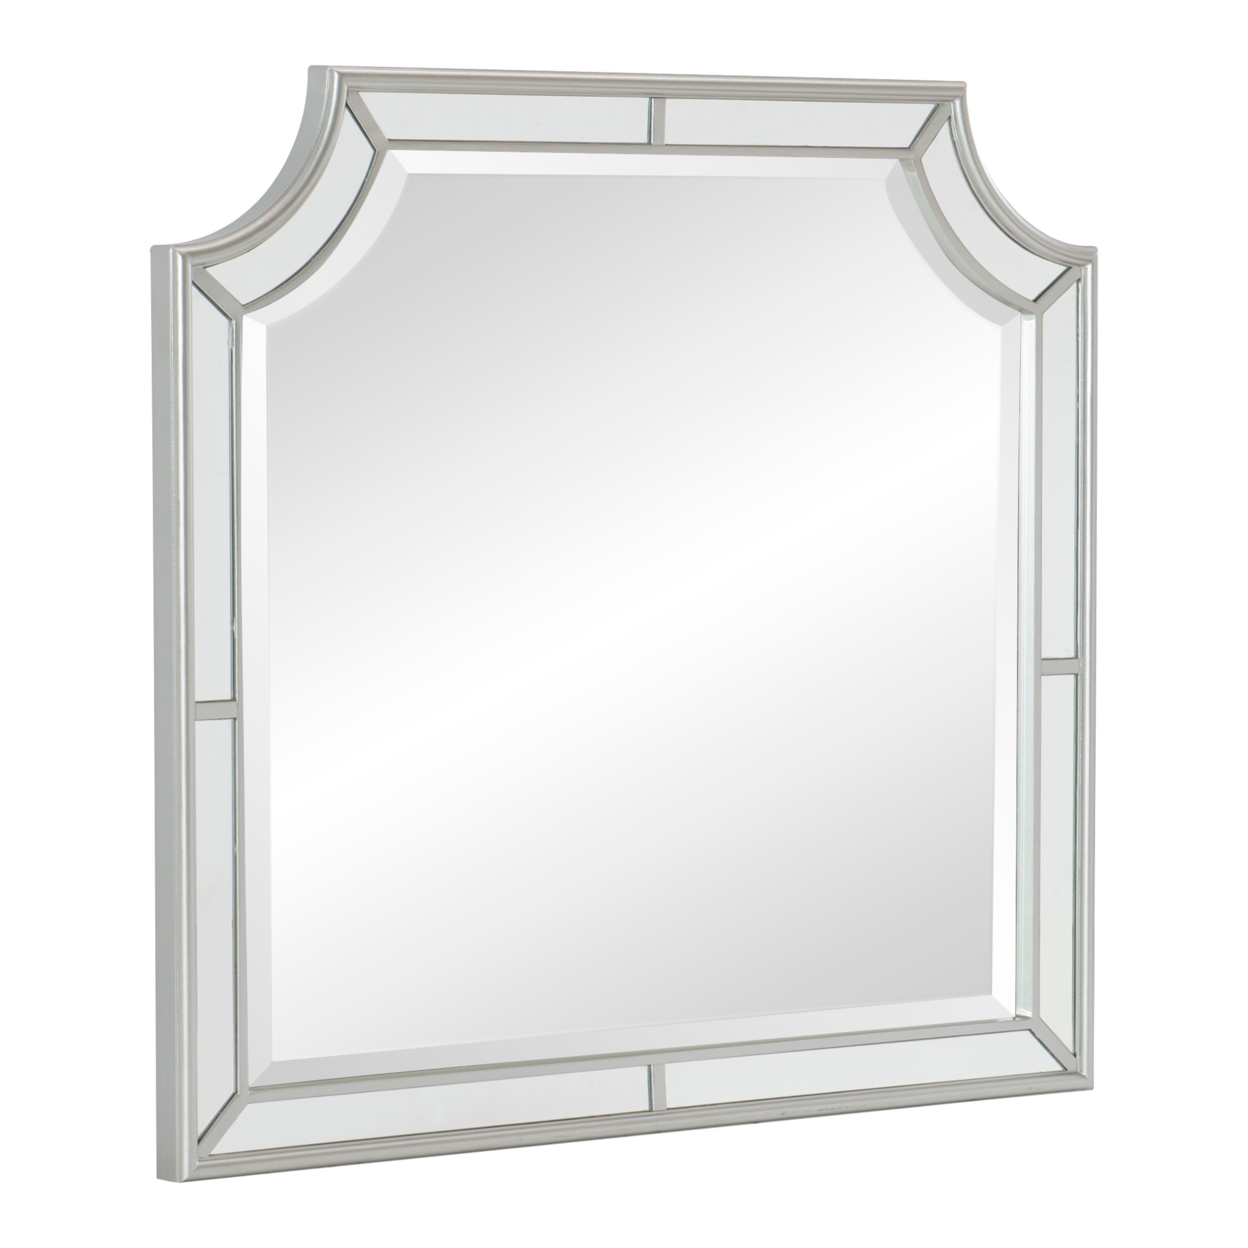 Wooden Frame Mirror With Clipped Corners And Mirror Trim, Silver- Saltoro Sherpi